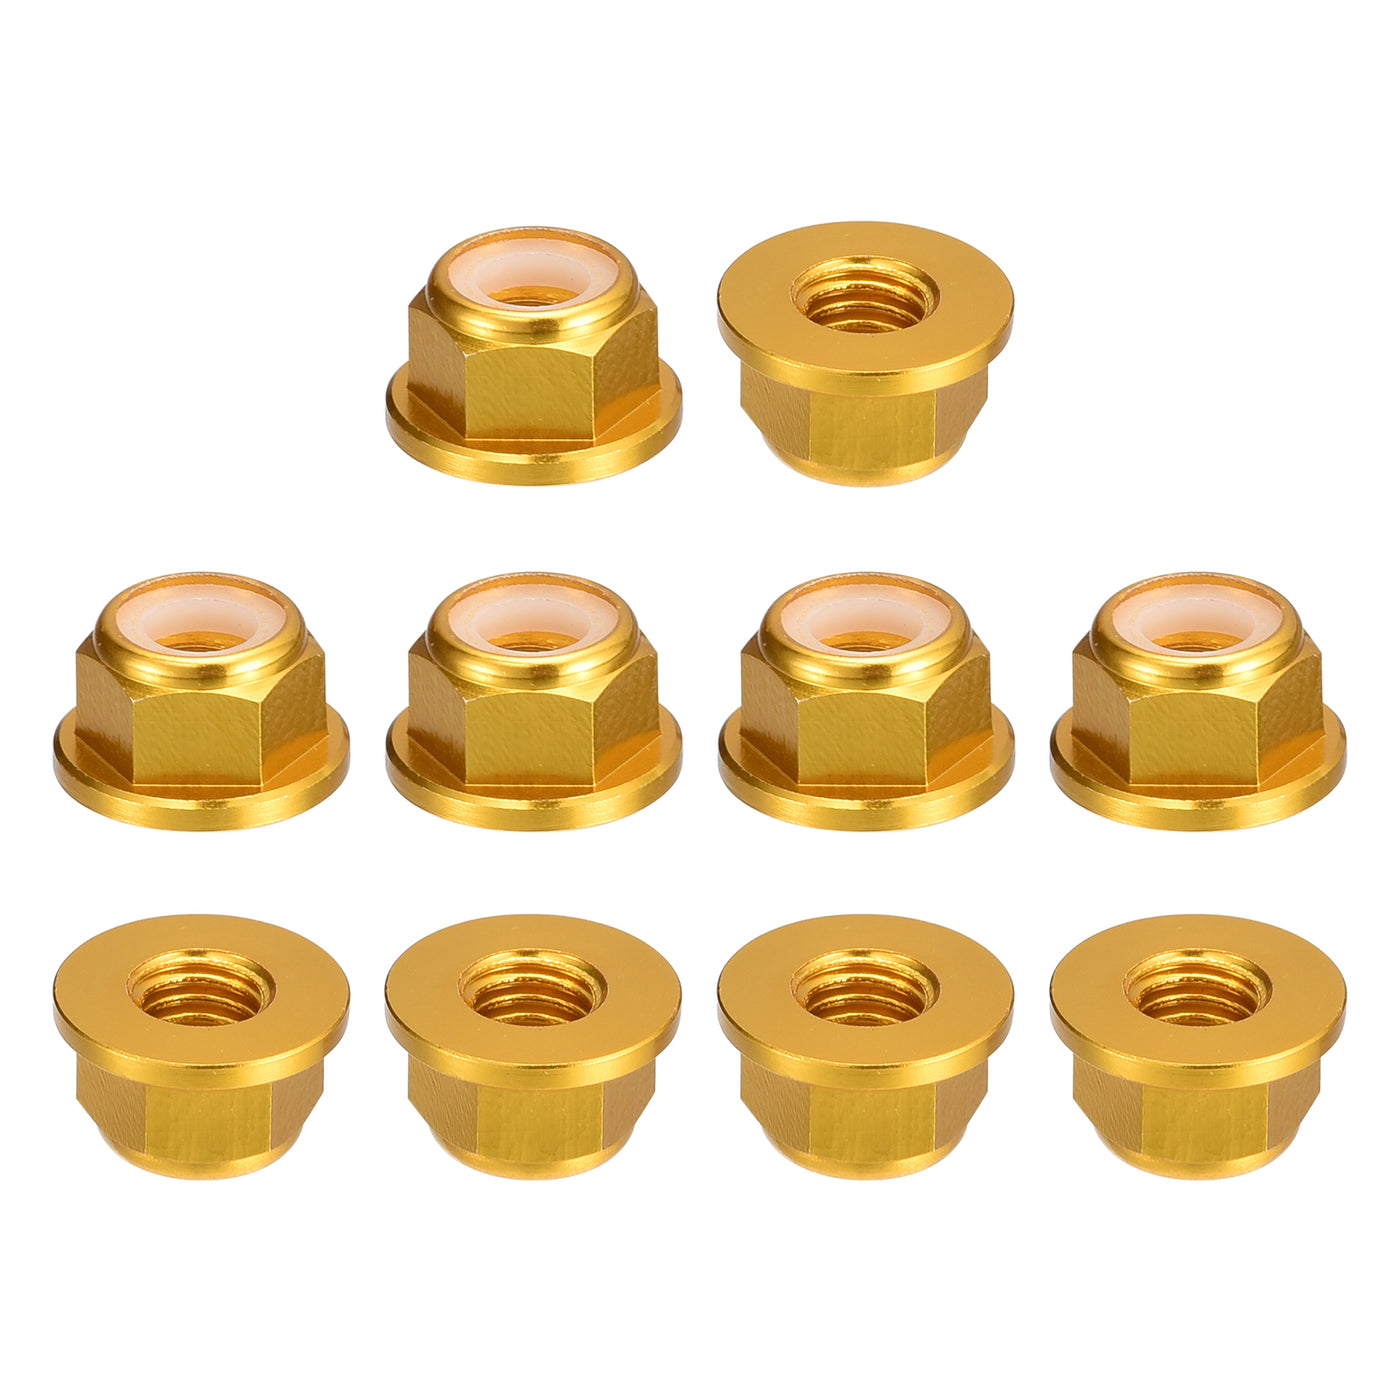 uxcell Uxcell Nylon Insert Hex Lock Nuts, 10pcs - M6 x 1mm Aluminum Alloy Self-Locking Nut, Anodizing Flange Lock Nut for Fasteners (Gold)